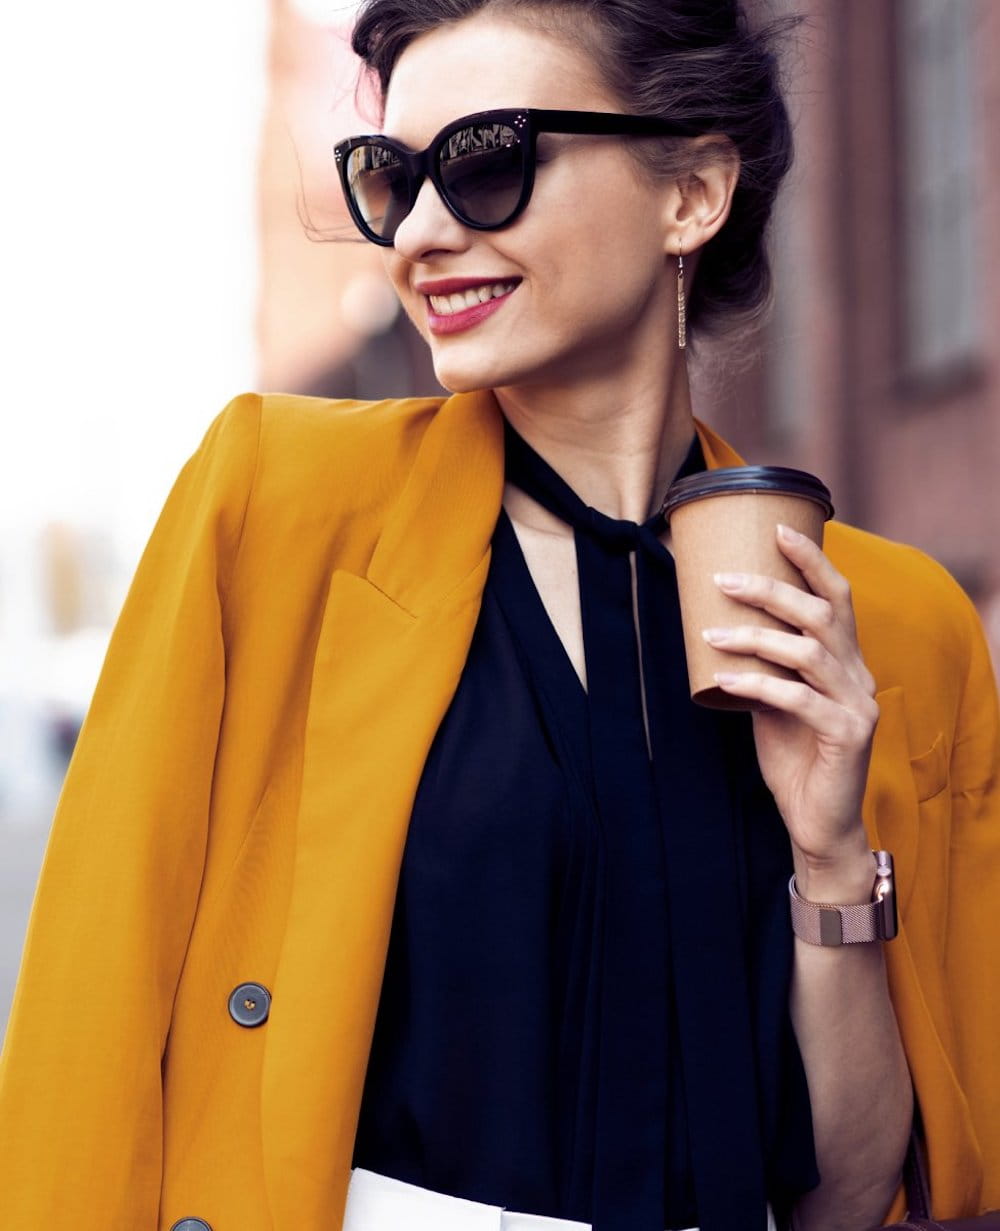 vi peel patient model walking down a street smiling with a coffee